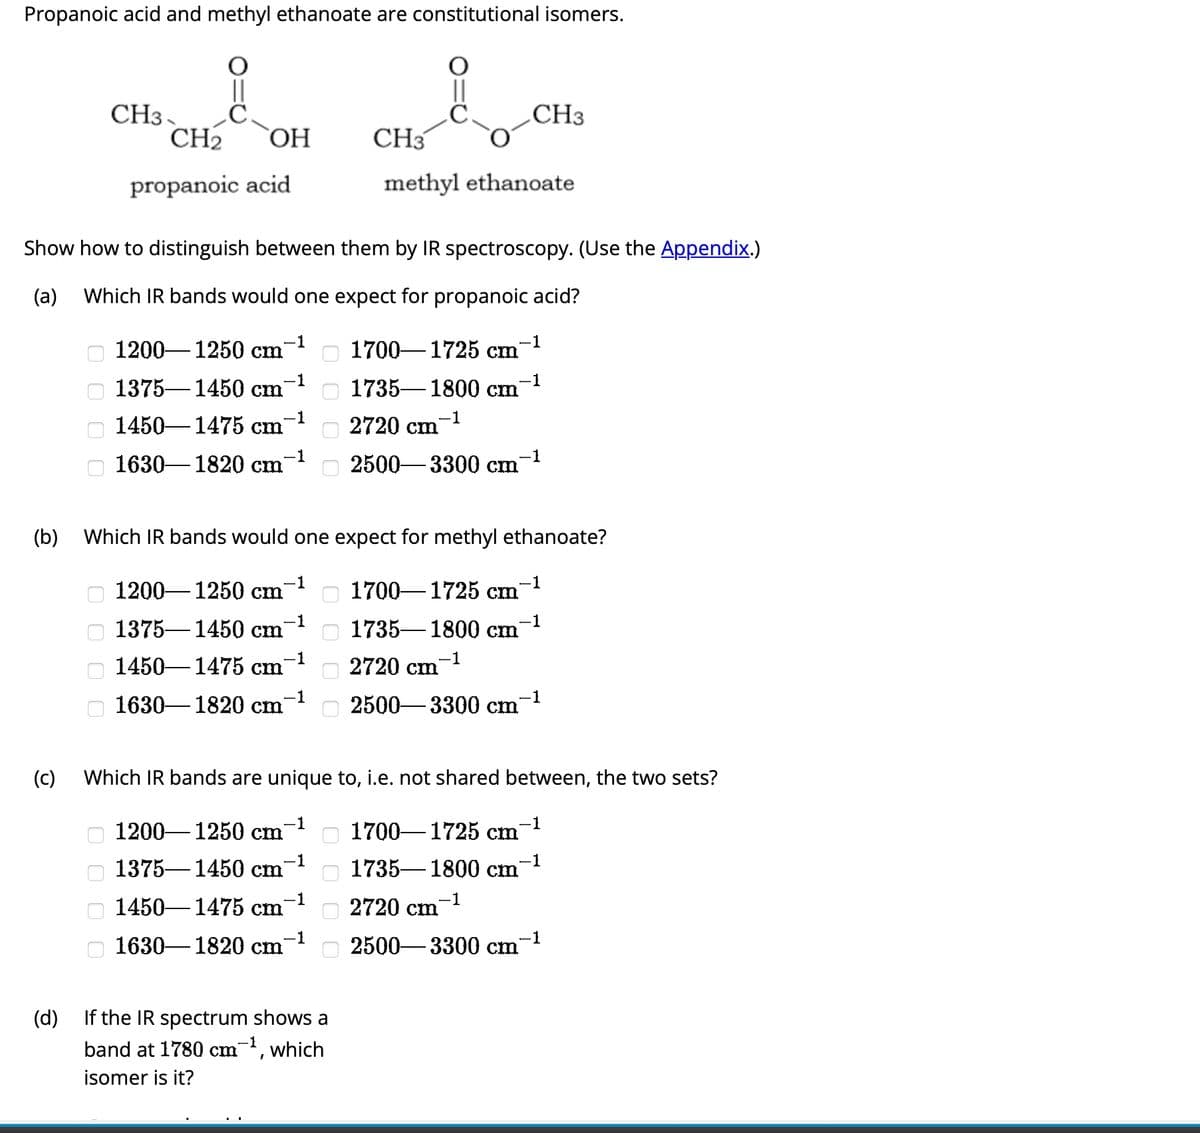 Propanoic acid and methyl ethanoate are constitutional isomers.
(c)
оооо
(d)
CH3
оооо
CH₂ OH
Show how to distinguish between them by IR spectroscopy. (Use the Appendix.)
(a) Which IR bands would one expect for propanoic acid?
propanoic acid
оооо
1200-1250 cm
1375 1450 cm
1450 1475 cm
1630-1820 cm
-1
1200-1250 cm
1375 1450 cm
1450-1475 cm
1630-1820 cm
1375 1450 cm
-1
-1
-1
-1
1200-1250 cm
(b) Which IR bands would one expect for methyl ethanoate?
-1
-1
1450 1475 cm
-1
-1
1630-1820 cm
-1
00000000
−1
CH₂-C
0000
methyl ethanoate
If the IR spectrum shows a
band at 1780 cm-¹, which
isomer is it?
1700-1725 cm
1735-1800 cm
2720 cm
-1
2500-3300 cm
2720 cm
Which IR bands are unique to, i.e. not shared between, the two sets?
-1
1700 1725 cm
2500-3300 cm
-1
CH3
1735-1800 cm
-1
-1
-1
2720 cm
-1
2500-3300 cm
-1
1700-1725 cm
-1
1735-1800 cm
-1
-1
-1